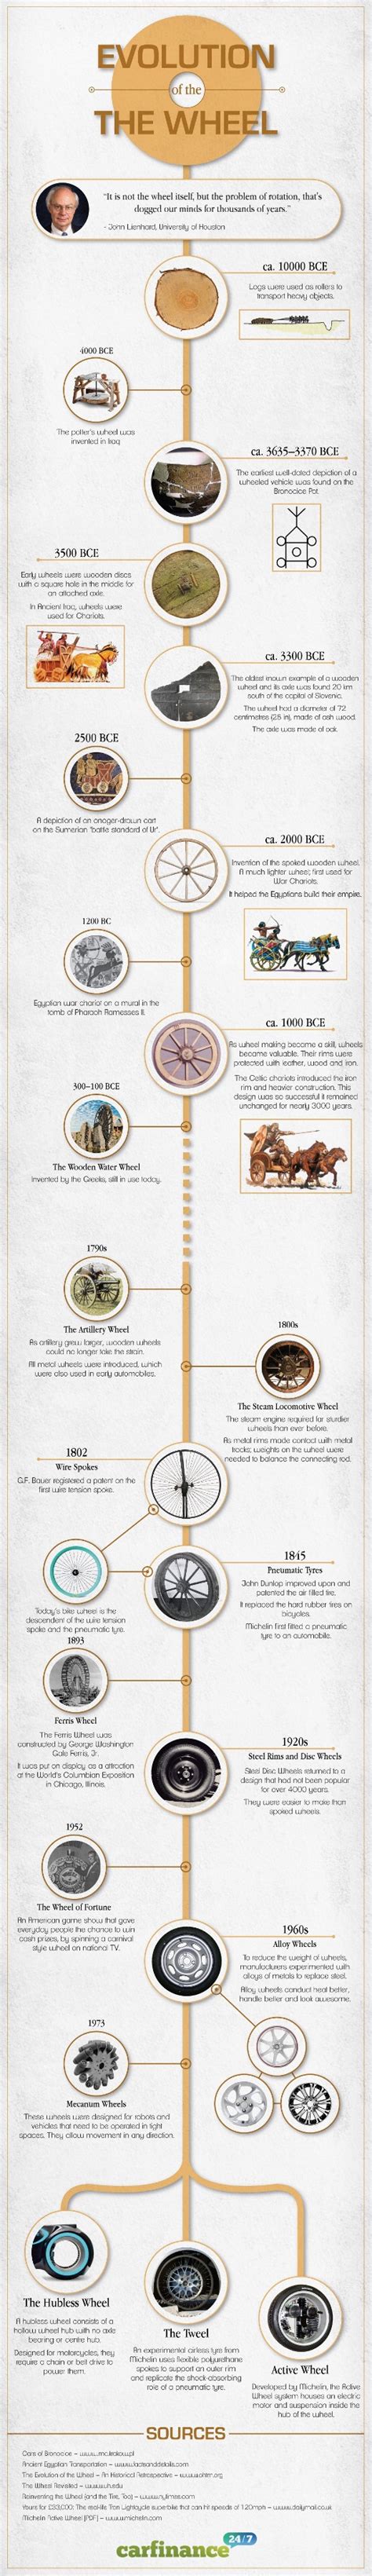 History Of The Wheel Info Graphically News Update On Hubsub Post